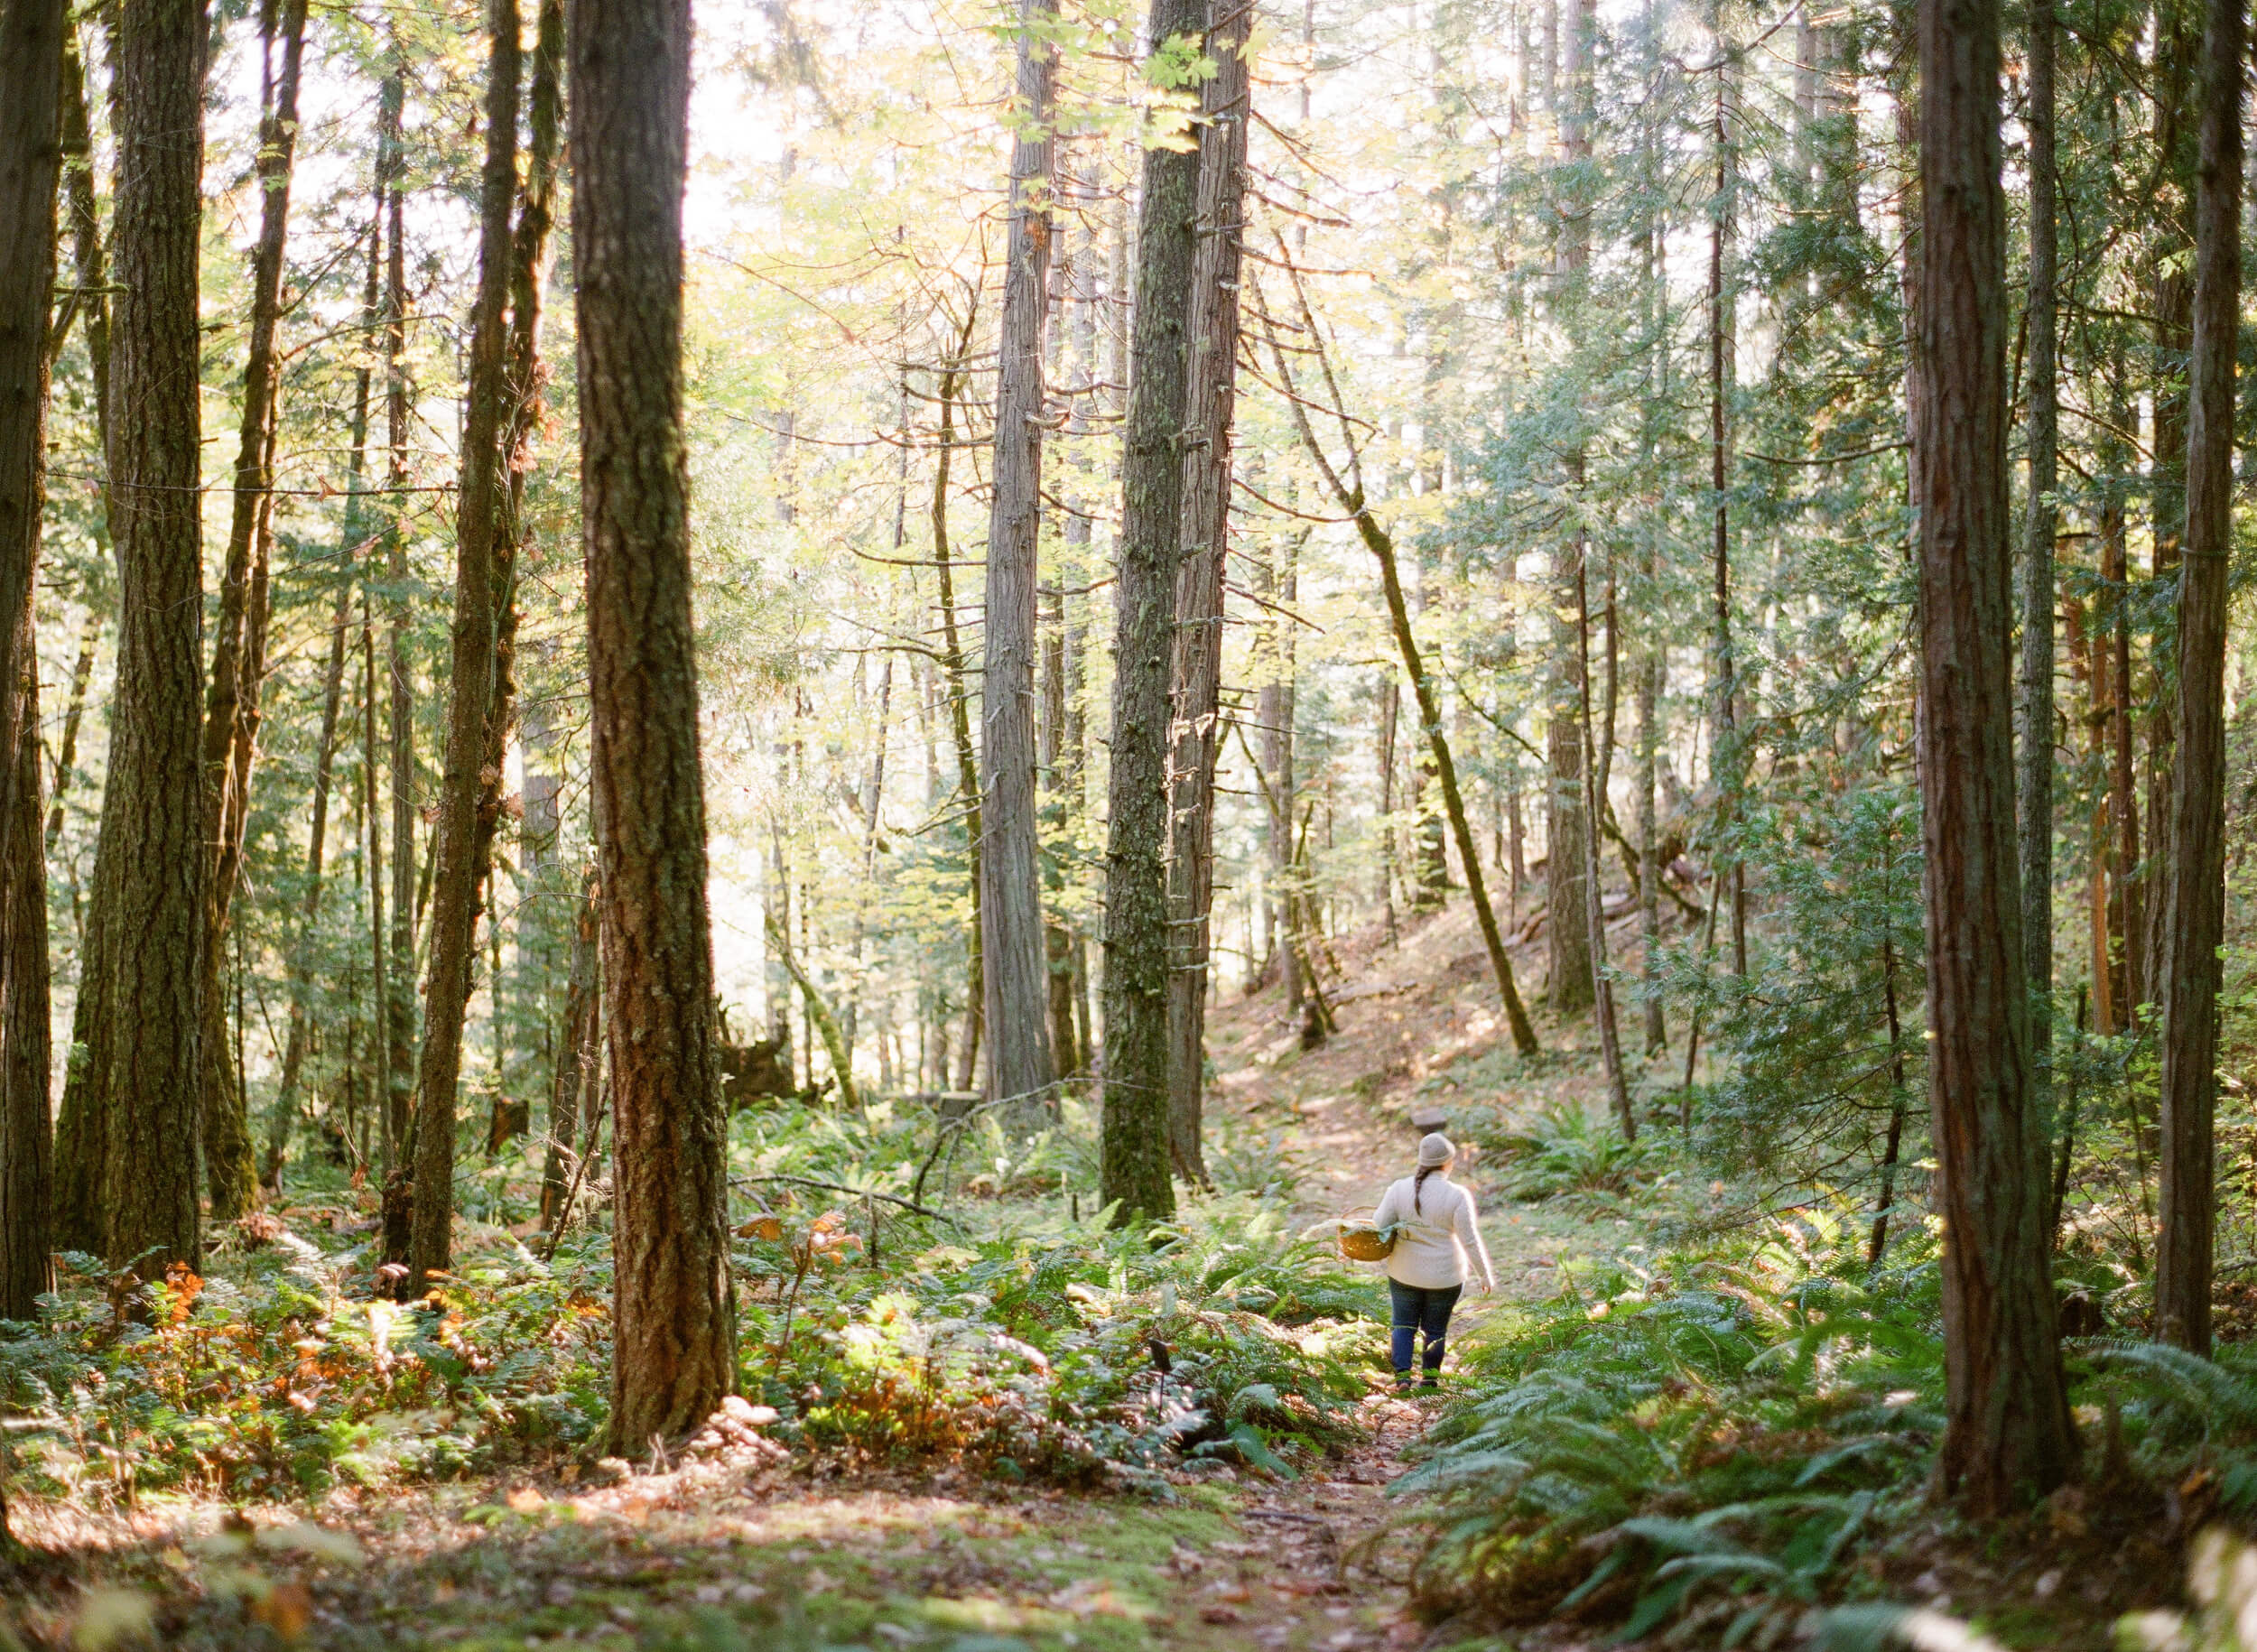 In the Proctor Forest, Joy Proctor finds inspiration in the beauty of nature.